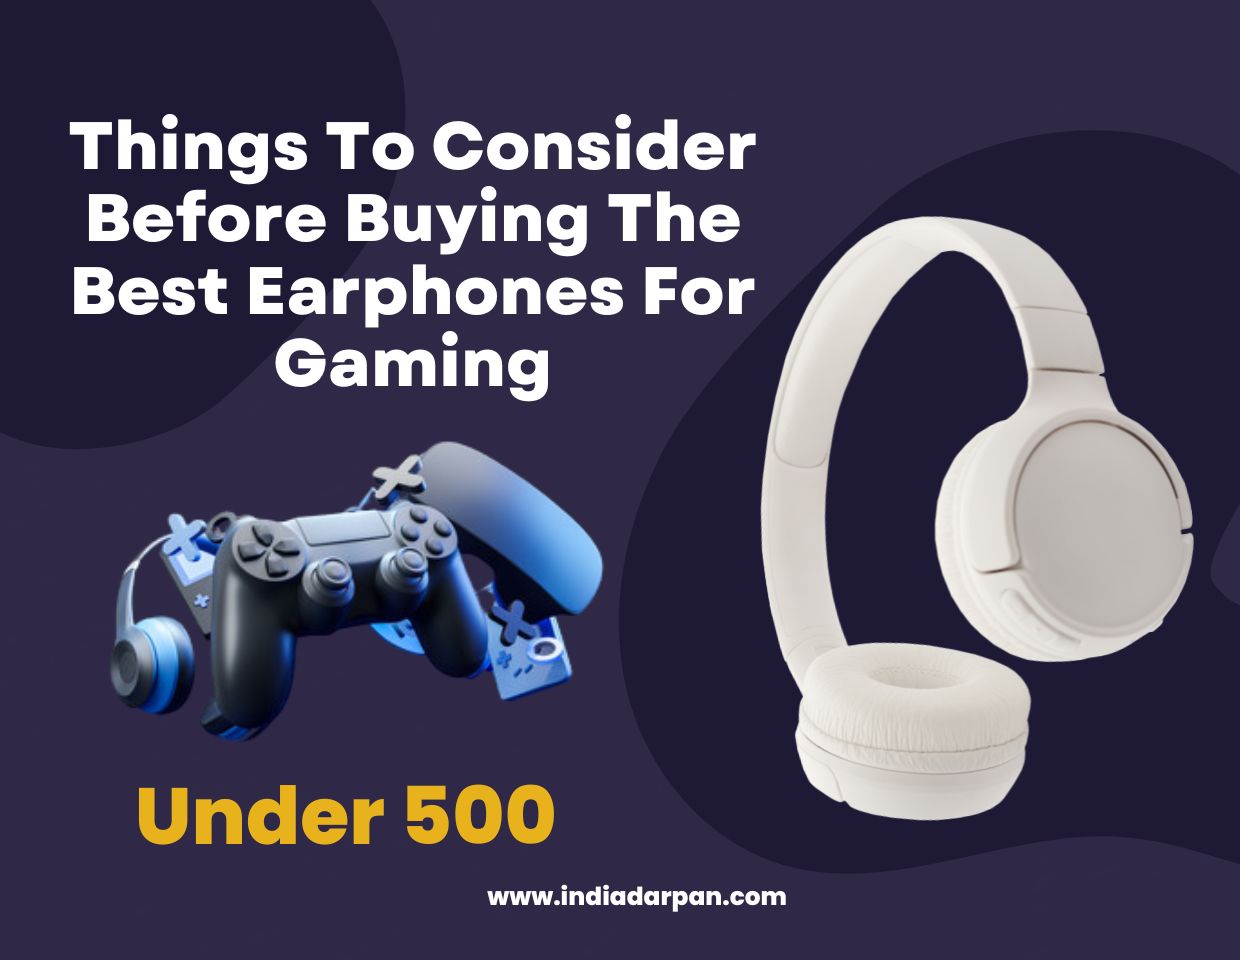 Things To Consider Before Buying The Best Earphones For Gaming Under 500